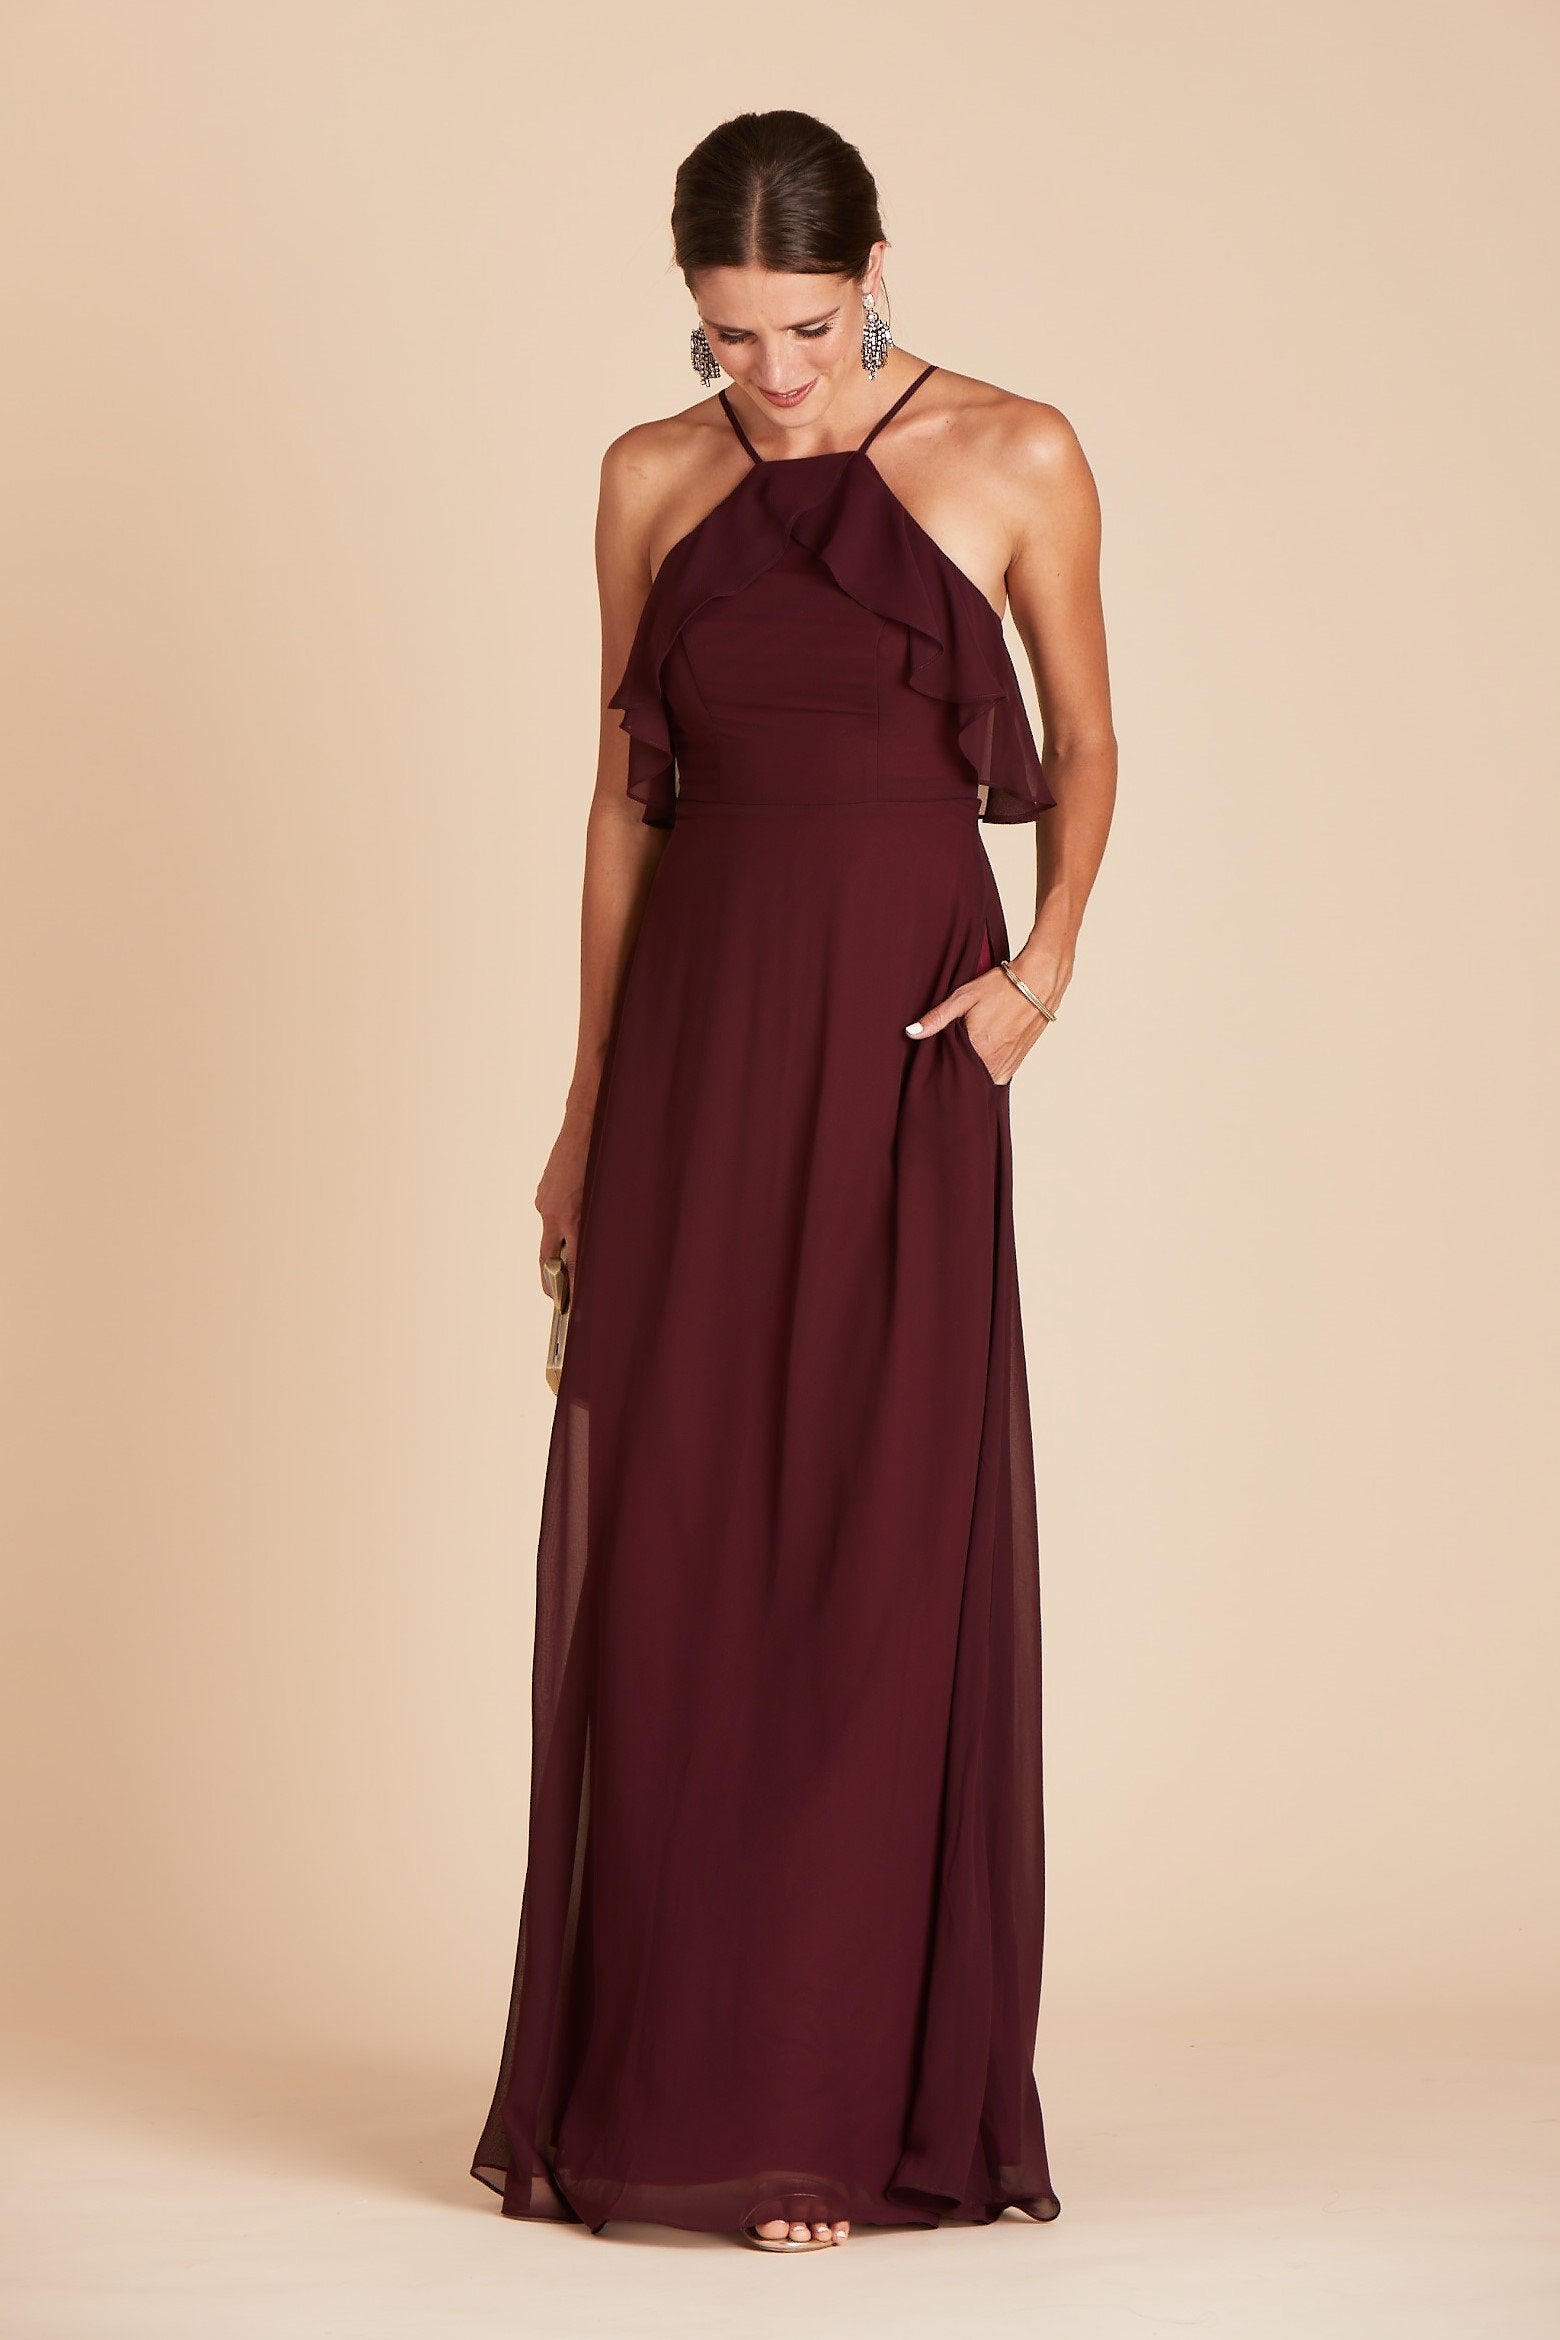 Jules bridesmaid dress in cabernet burgundy chiffon by Birdy Grey, front view with hand in pocket